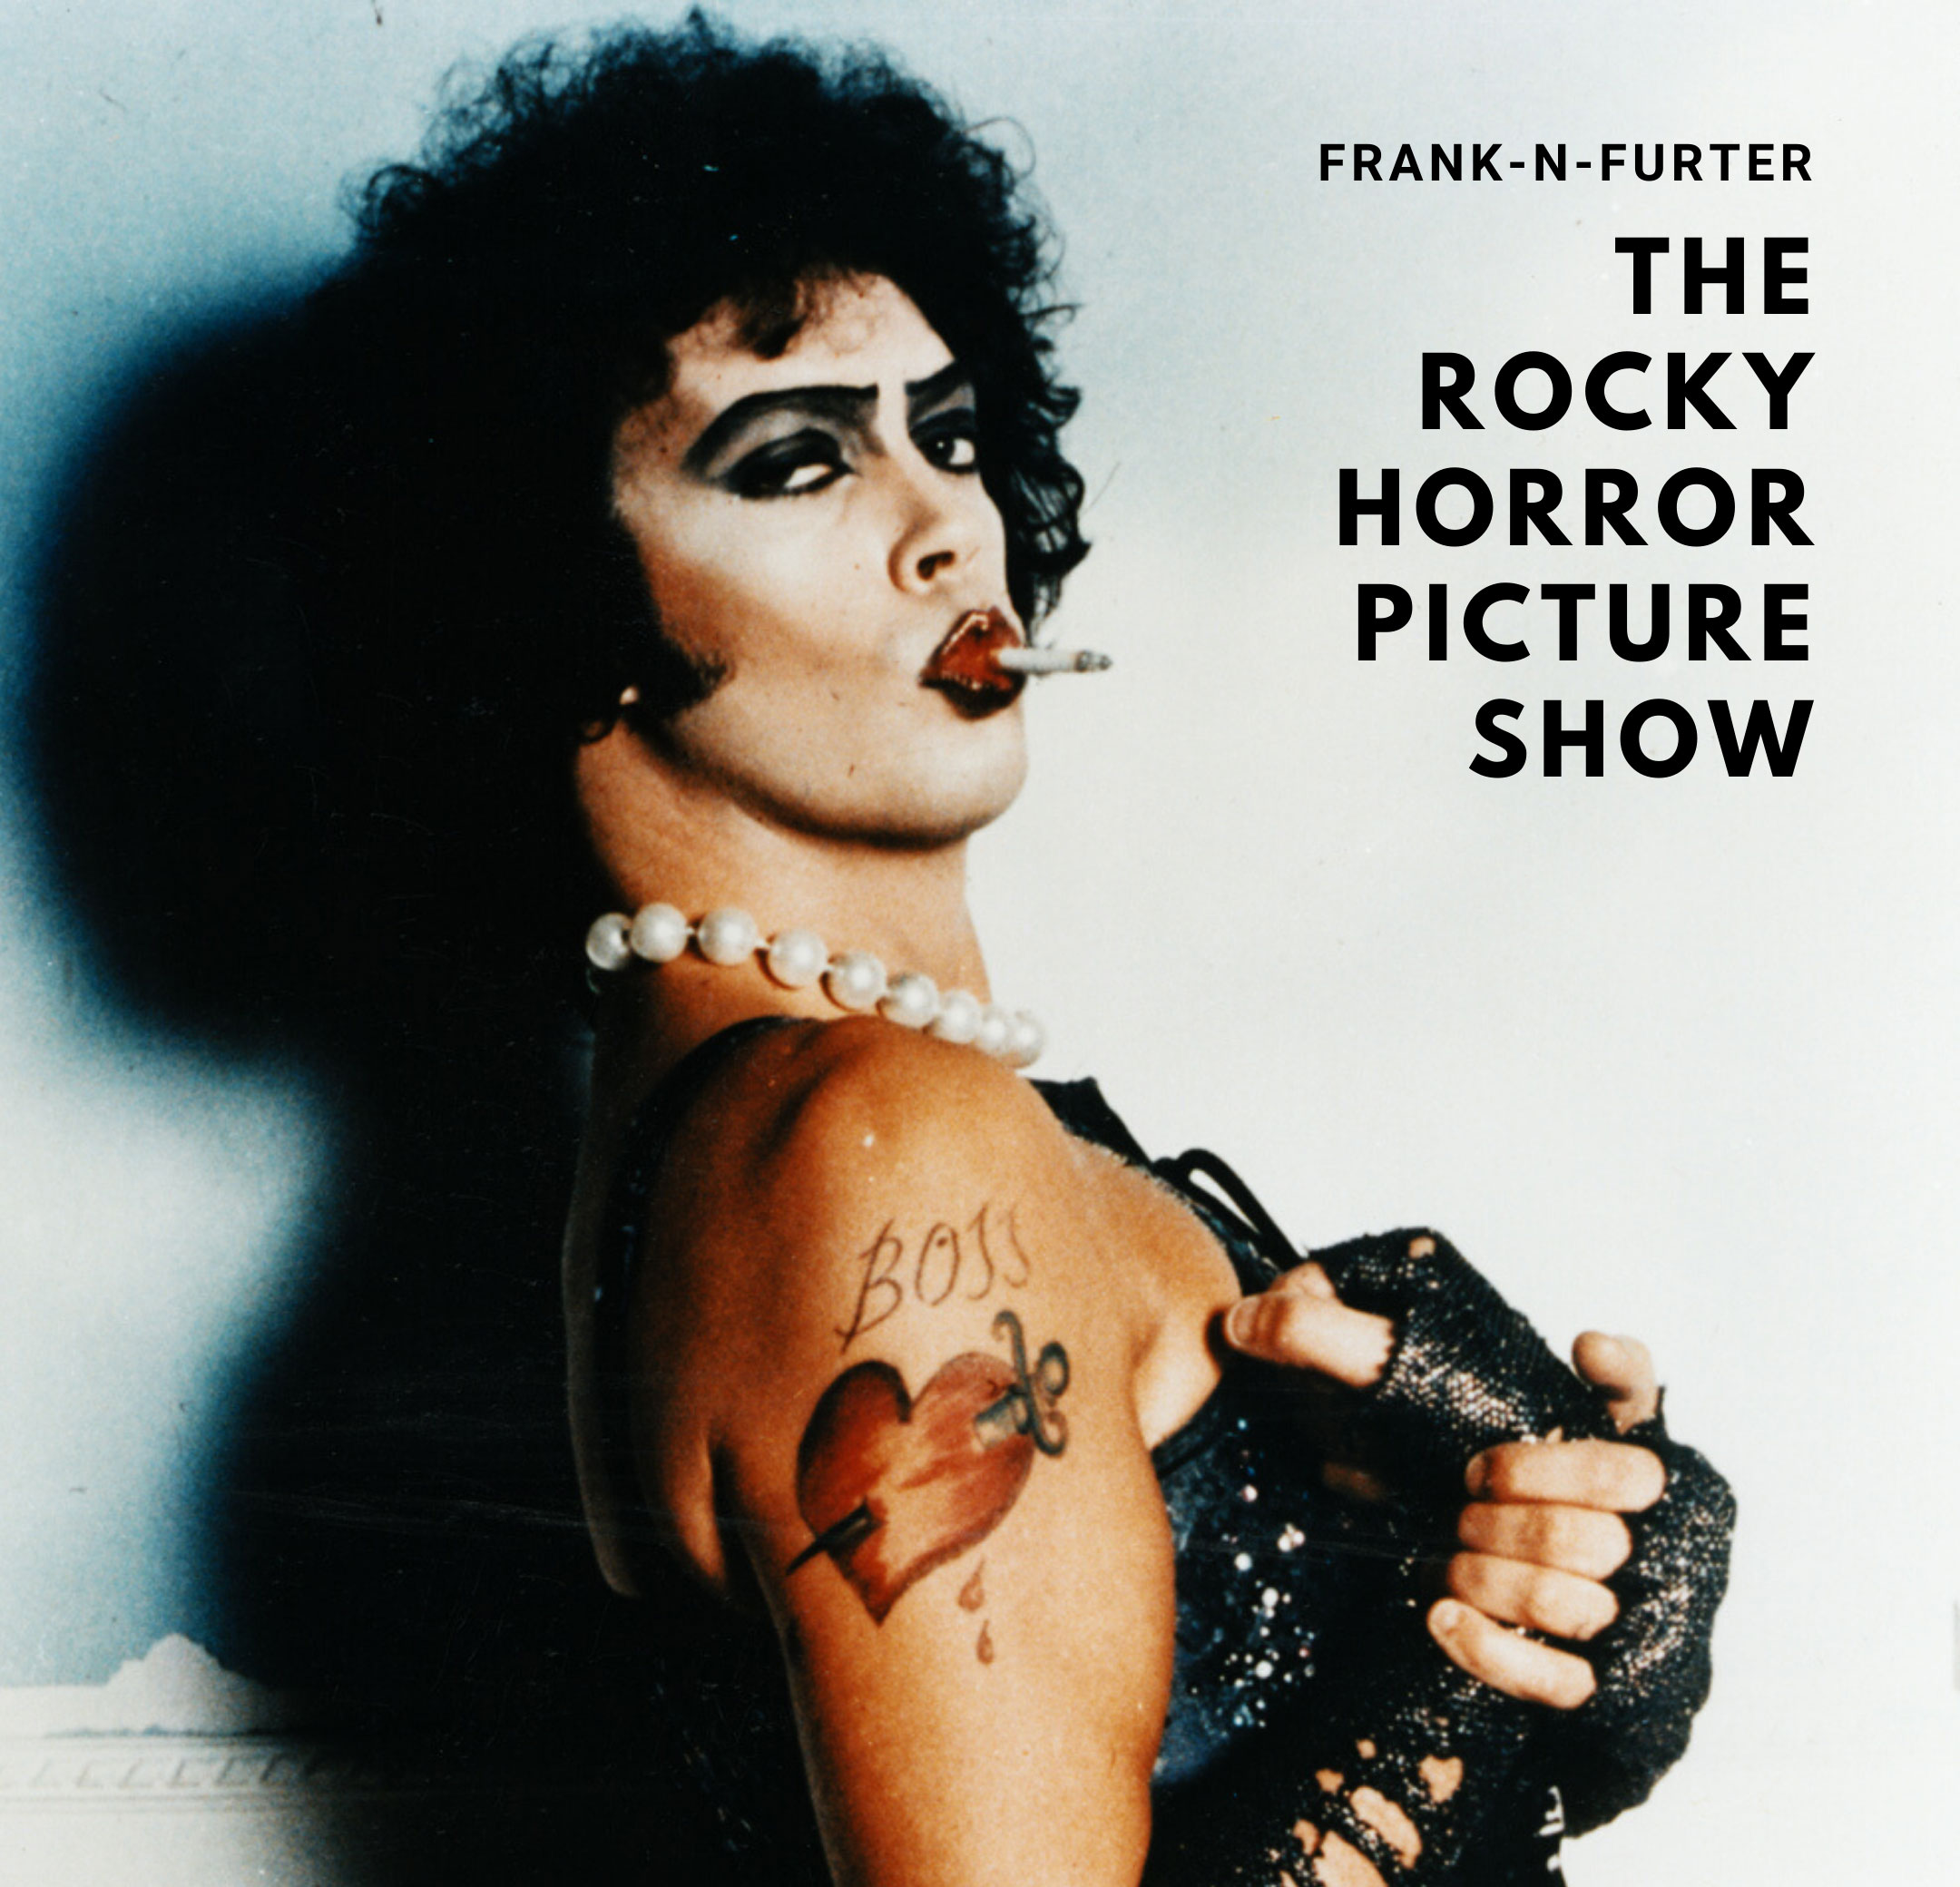 3-Frank-N-Furter The Rocky Horror Picture Show